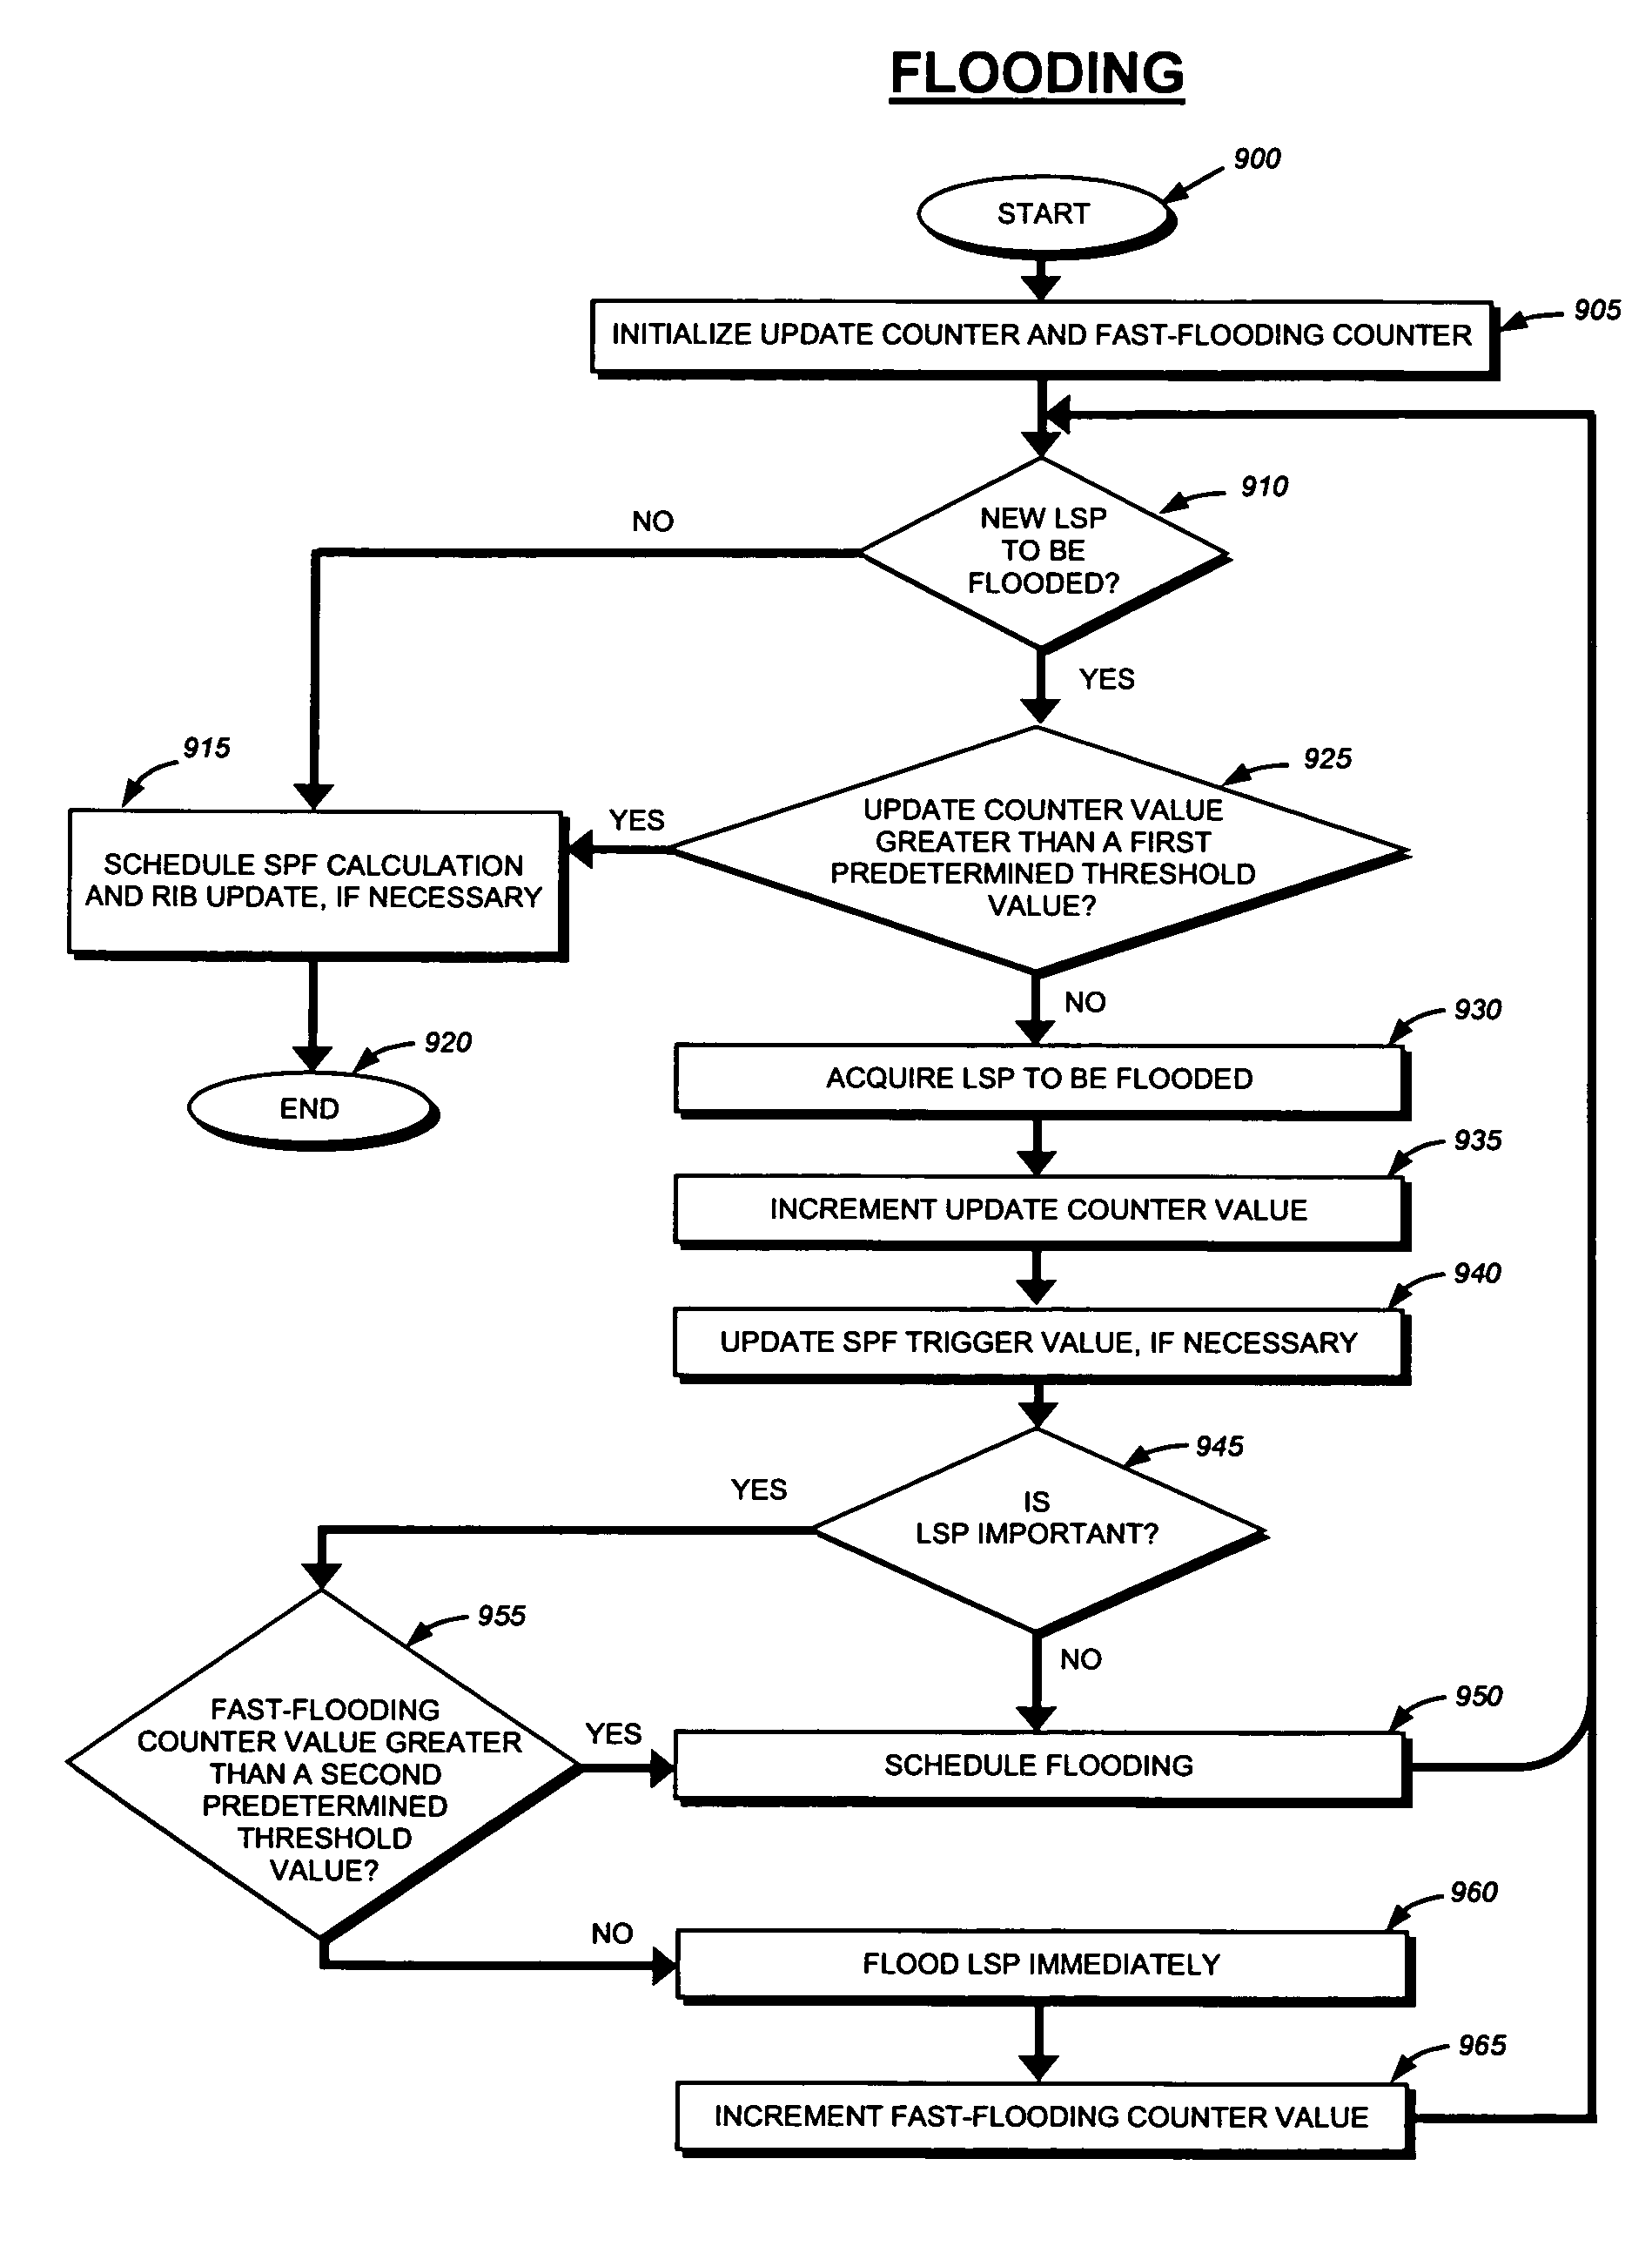 Mechanism to improve concurrency in execution of routing computation and routing information dissemination